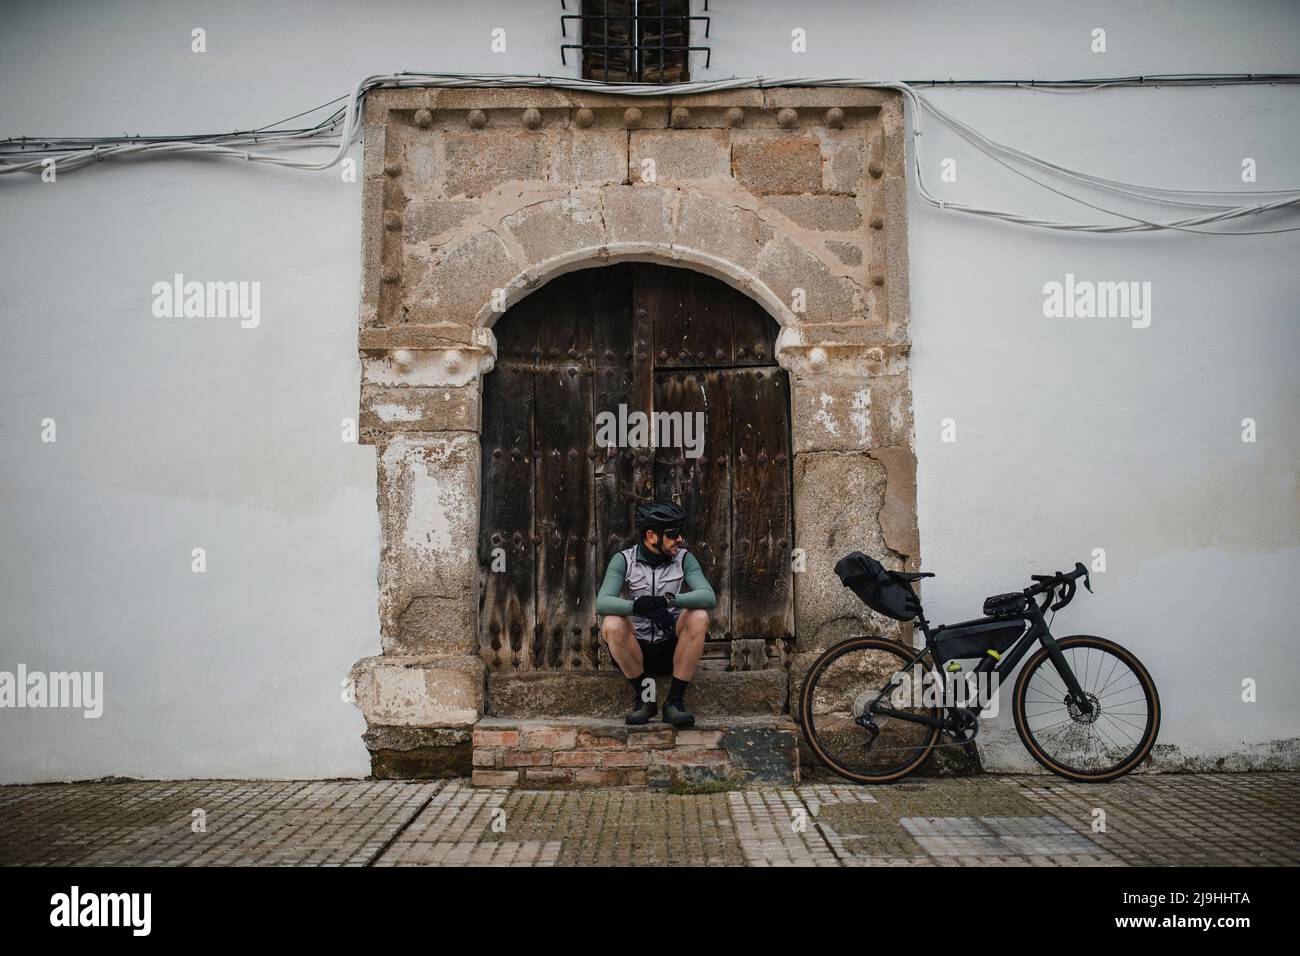 Cyclist with bicycle sitting in front of old door Stock Photo